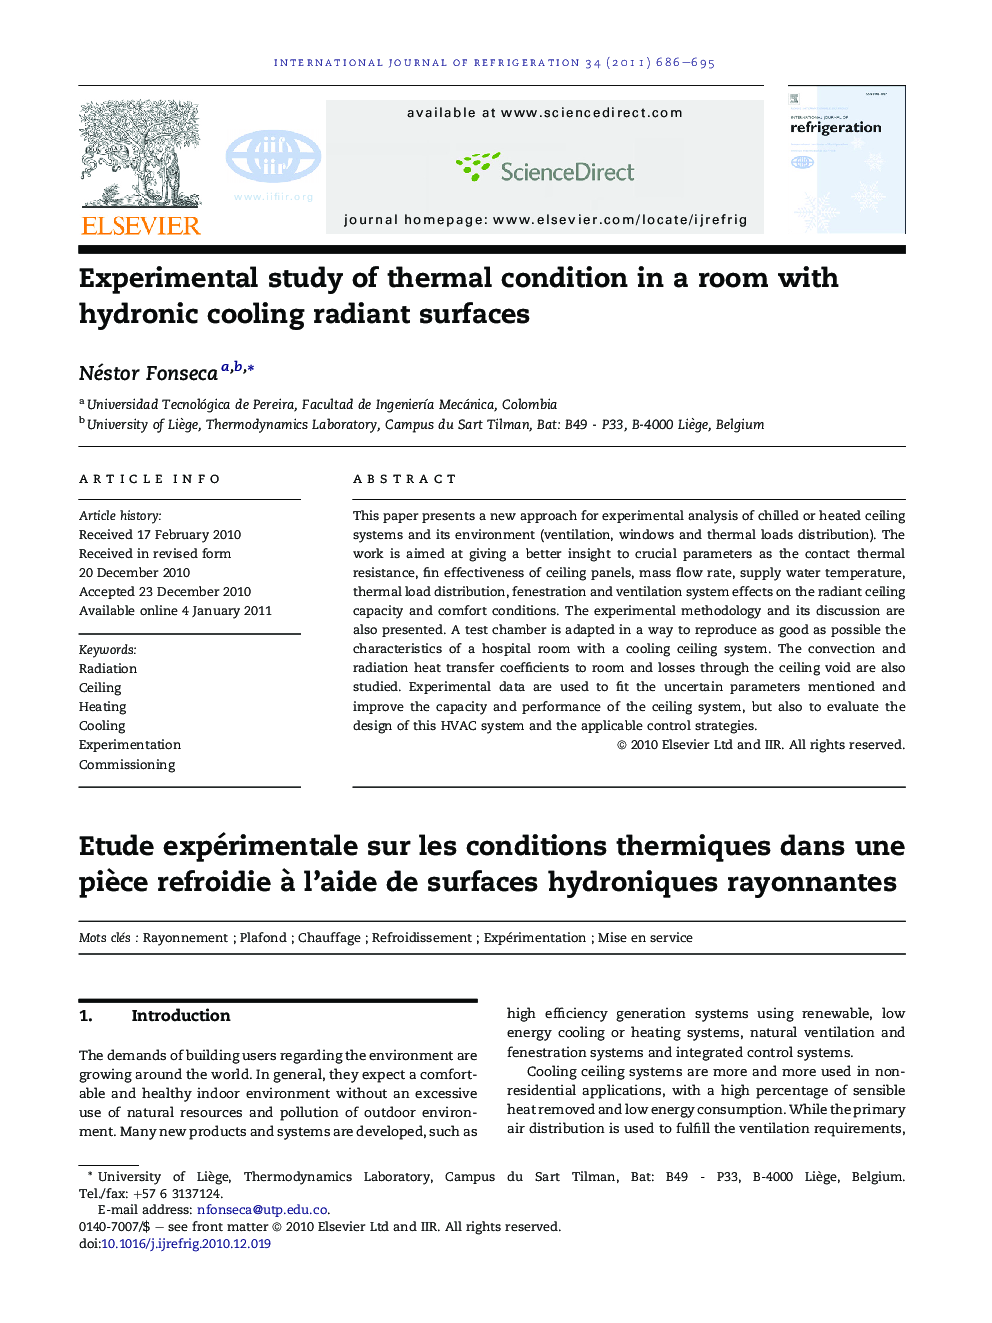 Experimental study of thermal condition in a room with hydronic cooling radiant surfaces